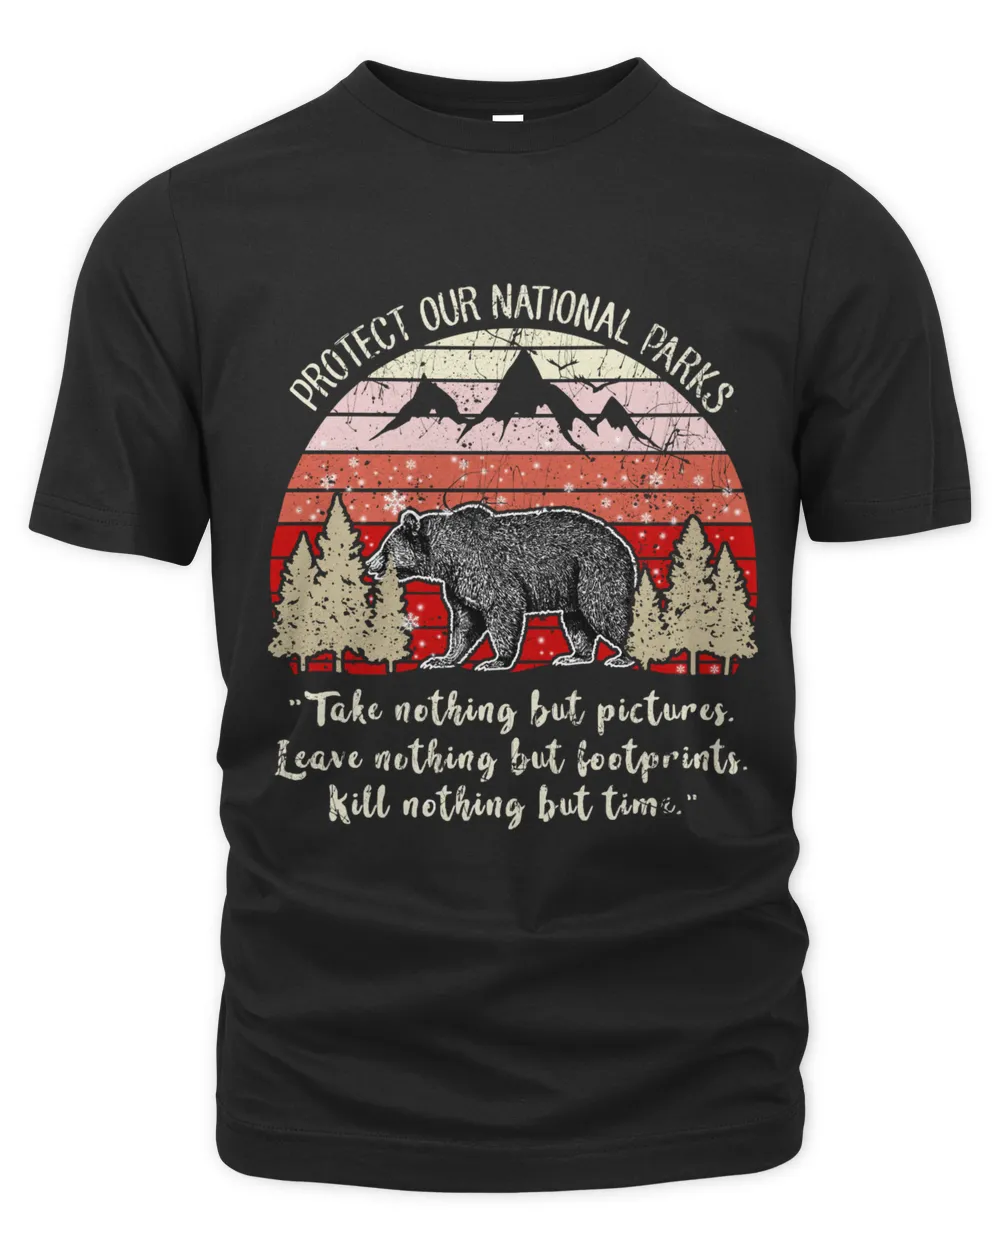 Protect Our National Parks